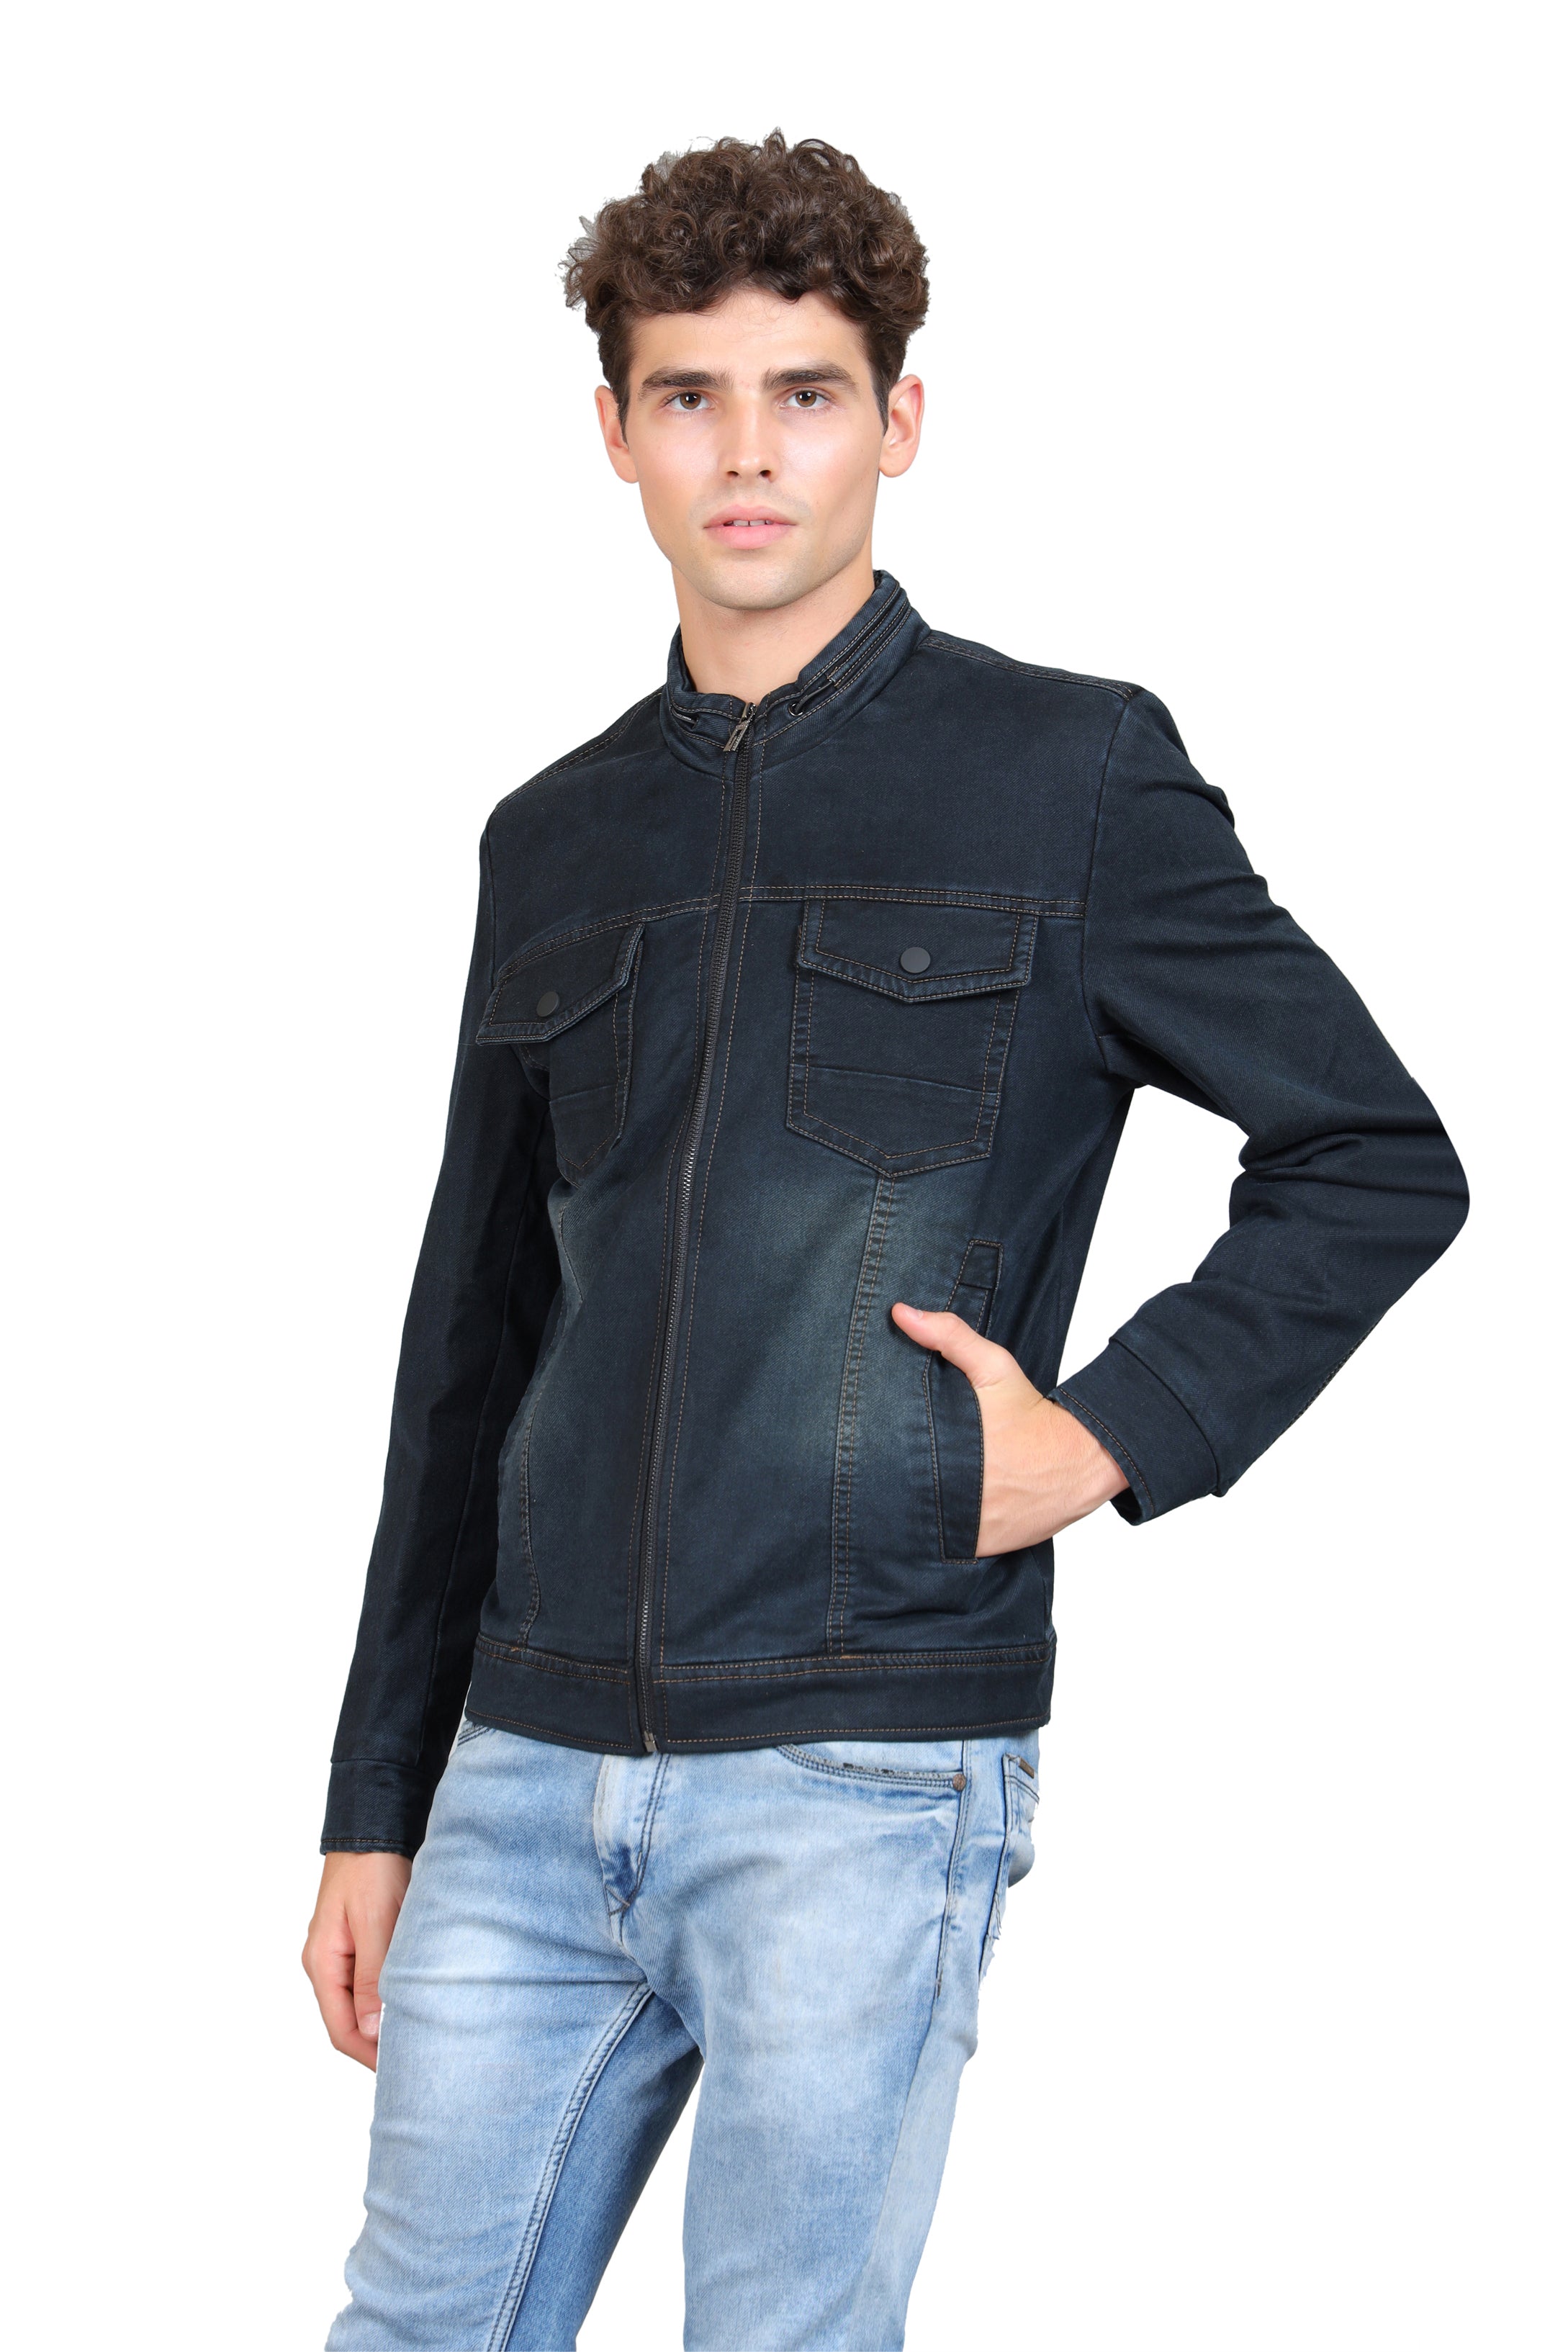 Buy YOUNG CLUB CLASSIC Stand Collar Denim Jacket - Jackets for Men 26374042  | Myntra